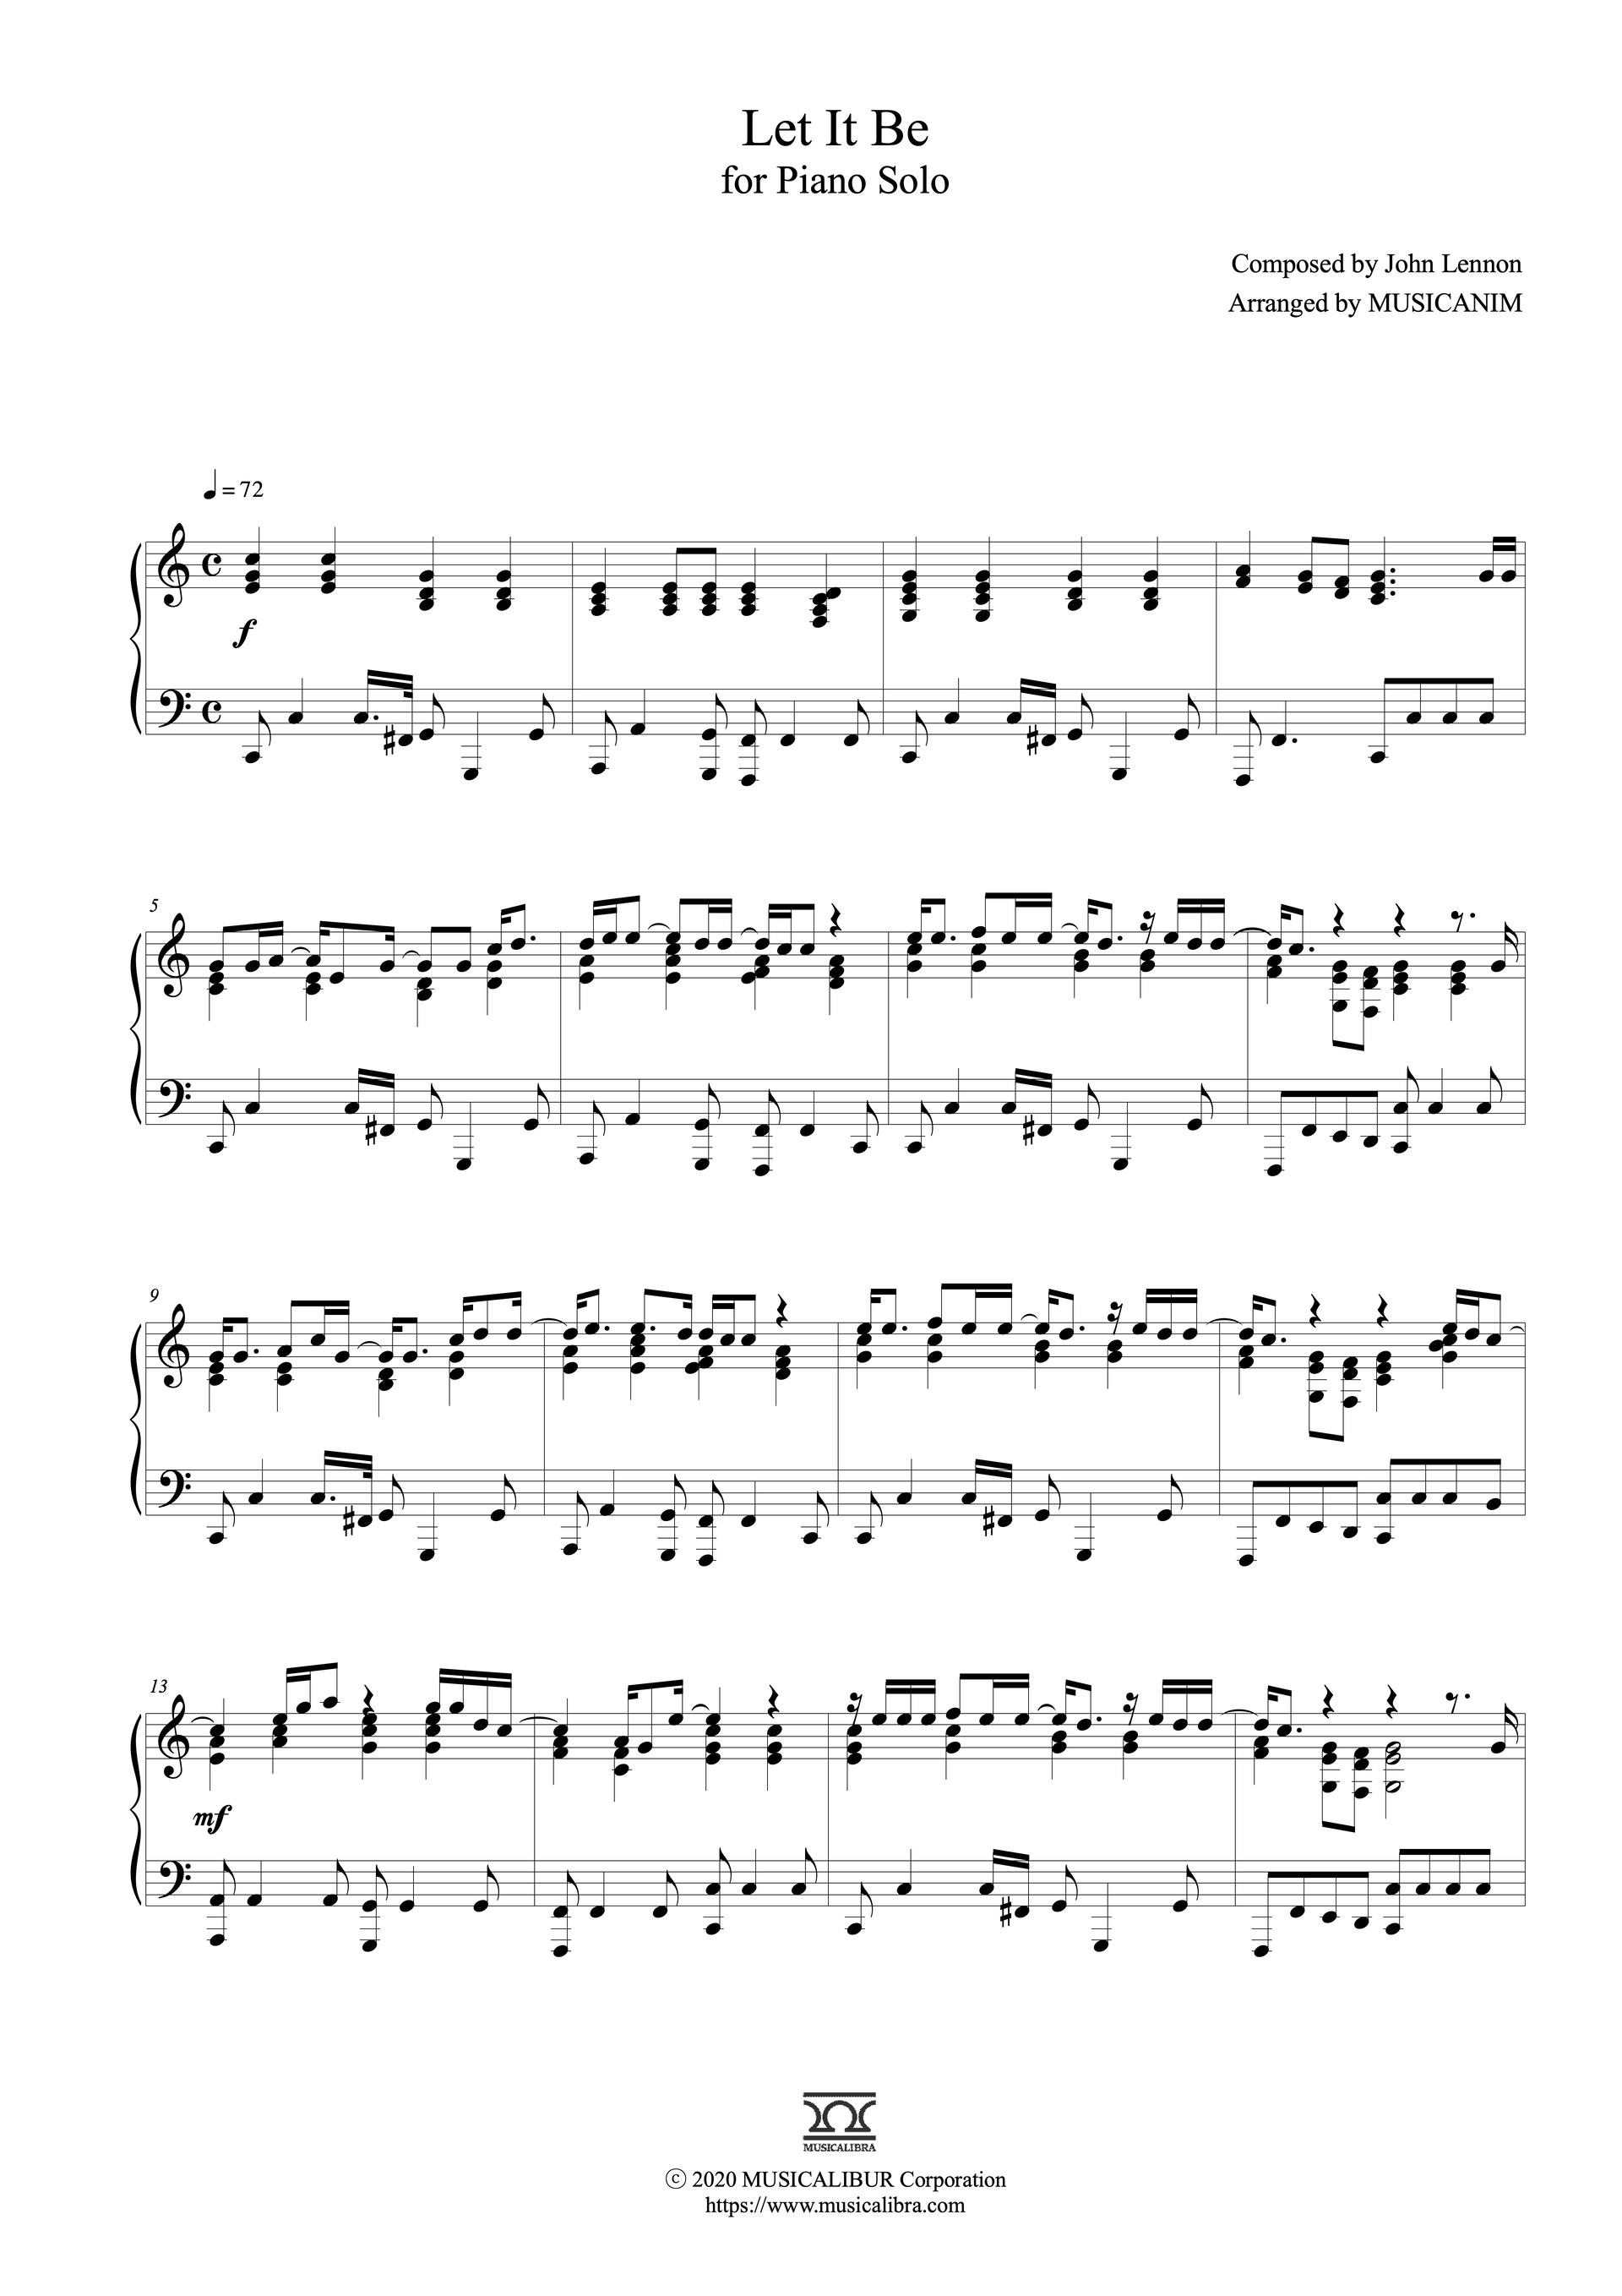 Sheet music of Let It Be arranged for piano solo preview page 1